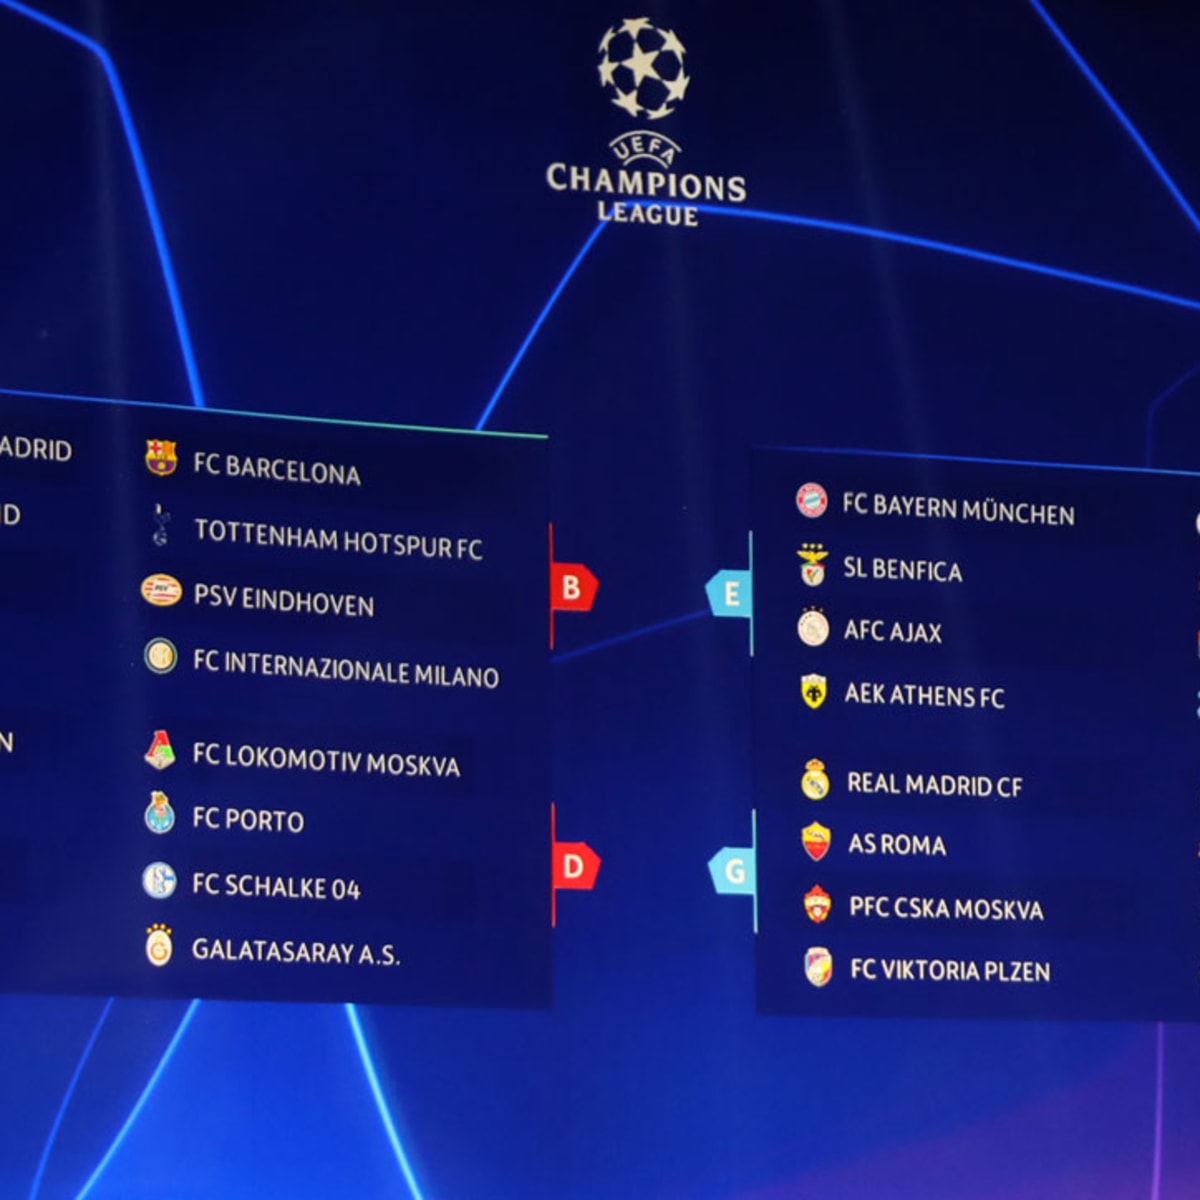 Like this it remains the phase of groups of the Champions 2018-19